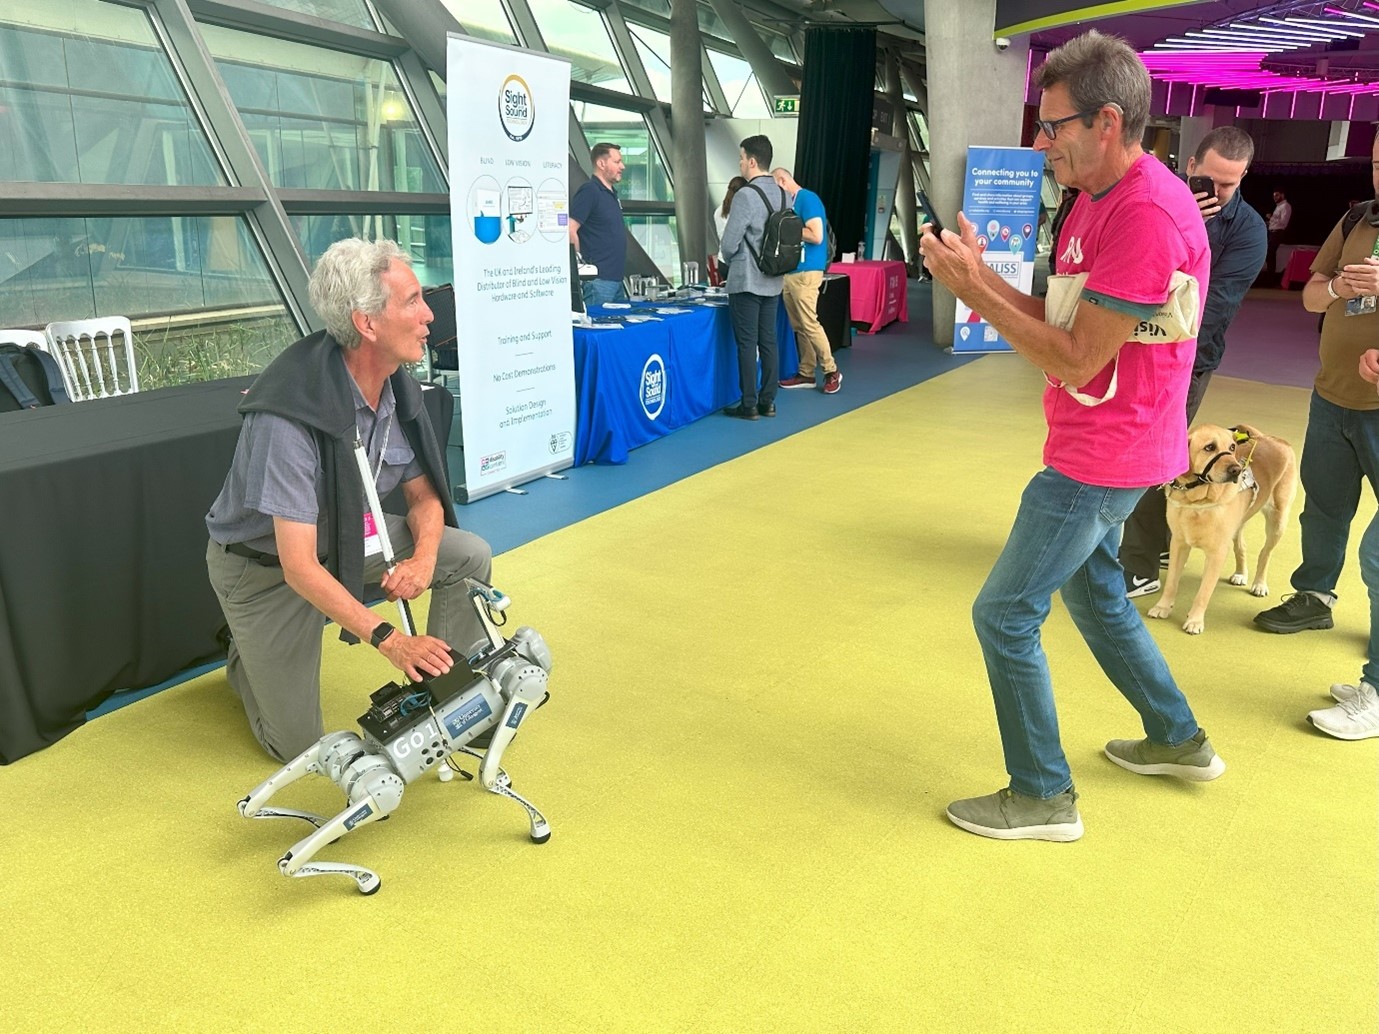 Two participants at a recent event at the SEC showcasing the RoboDog project